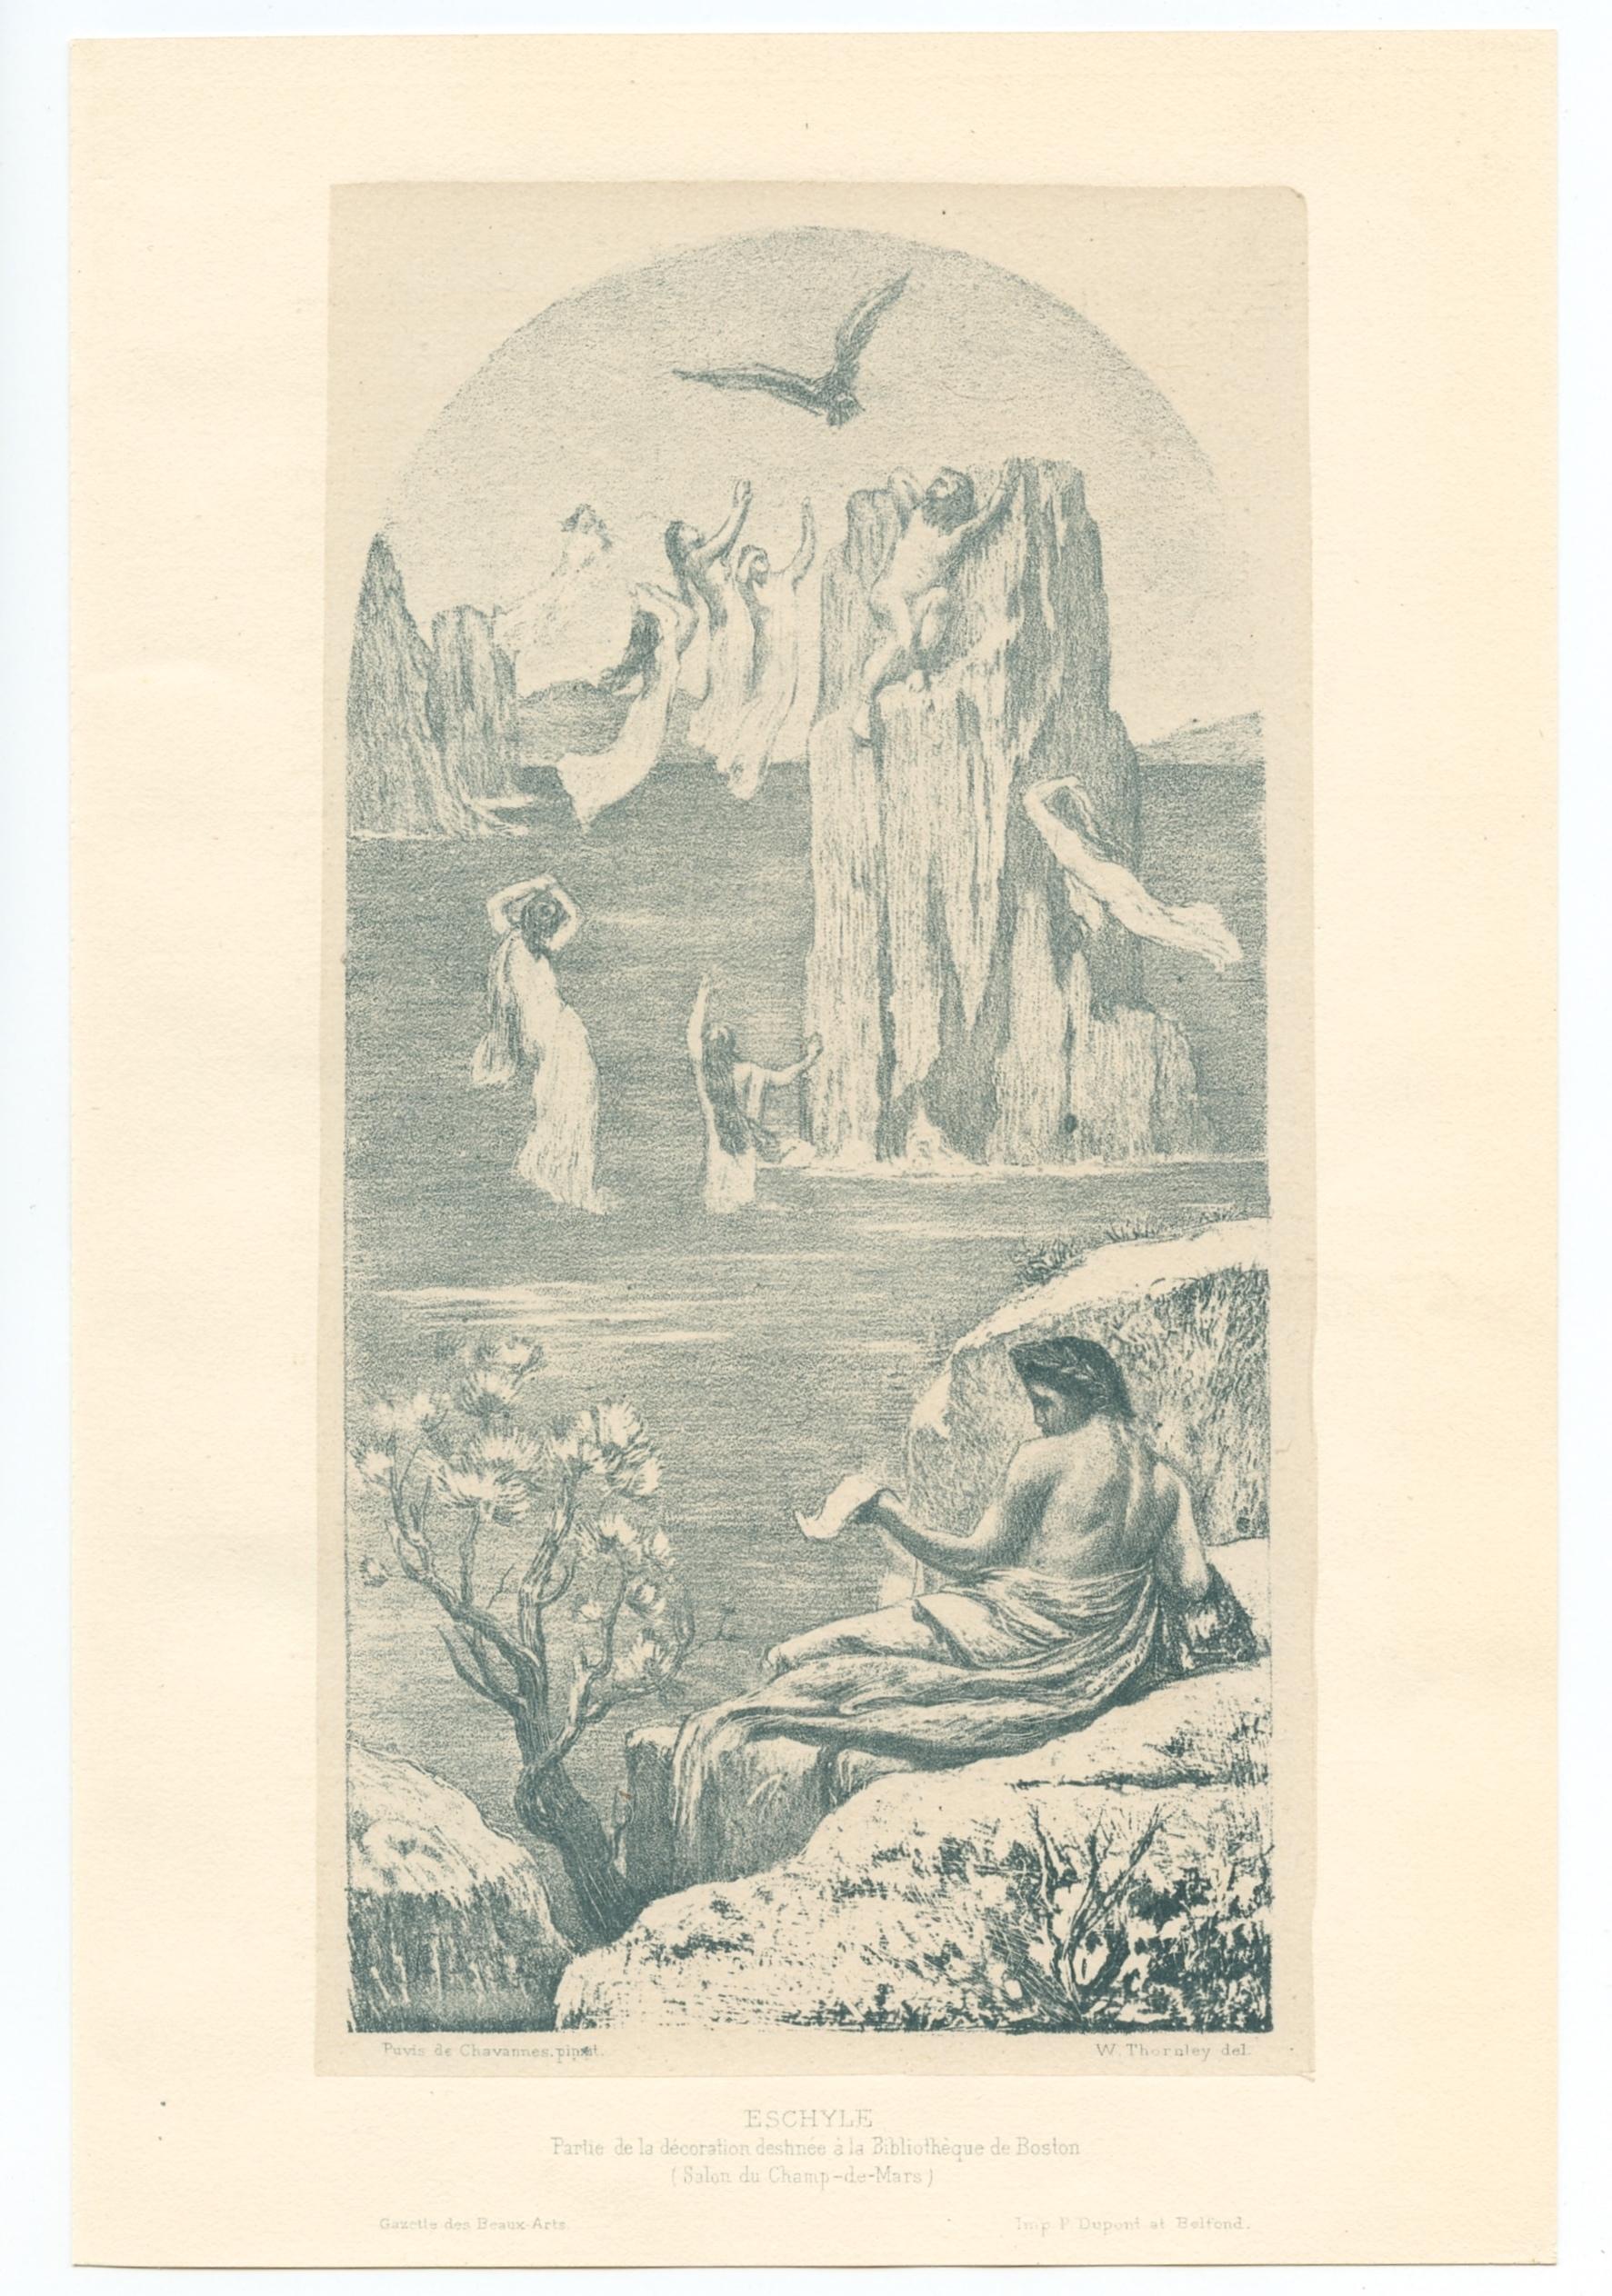 Medium: lithograph (after the painting). Executed by William Thornley after Puvis de Chavannes and published in Paris in 1896 by Gazette des Beaux-Arts. This impression is printed in a lovely blue-gray ink on chine-colle paper. Image size: 8 5/8 x 4